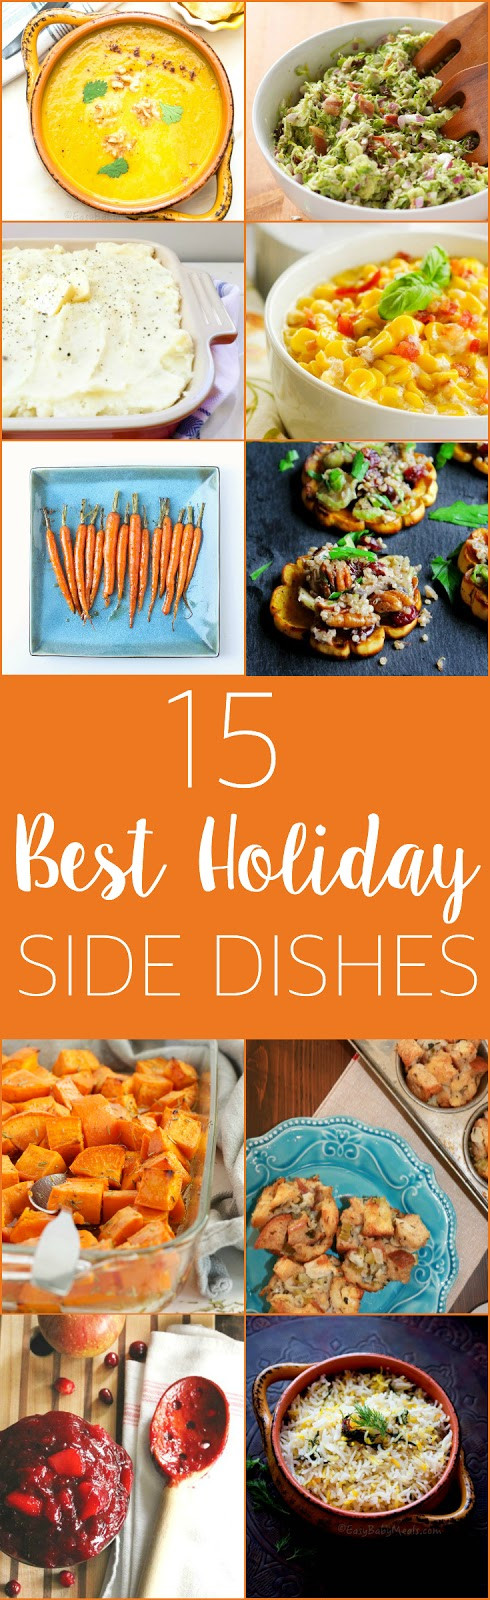 Best Holiday Side Dishes
 15 Best Ever Holiday Side Dishes The Busy Baker